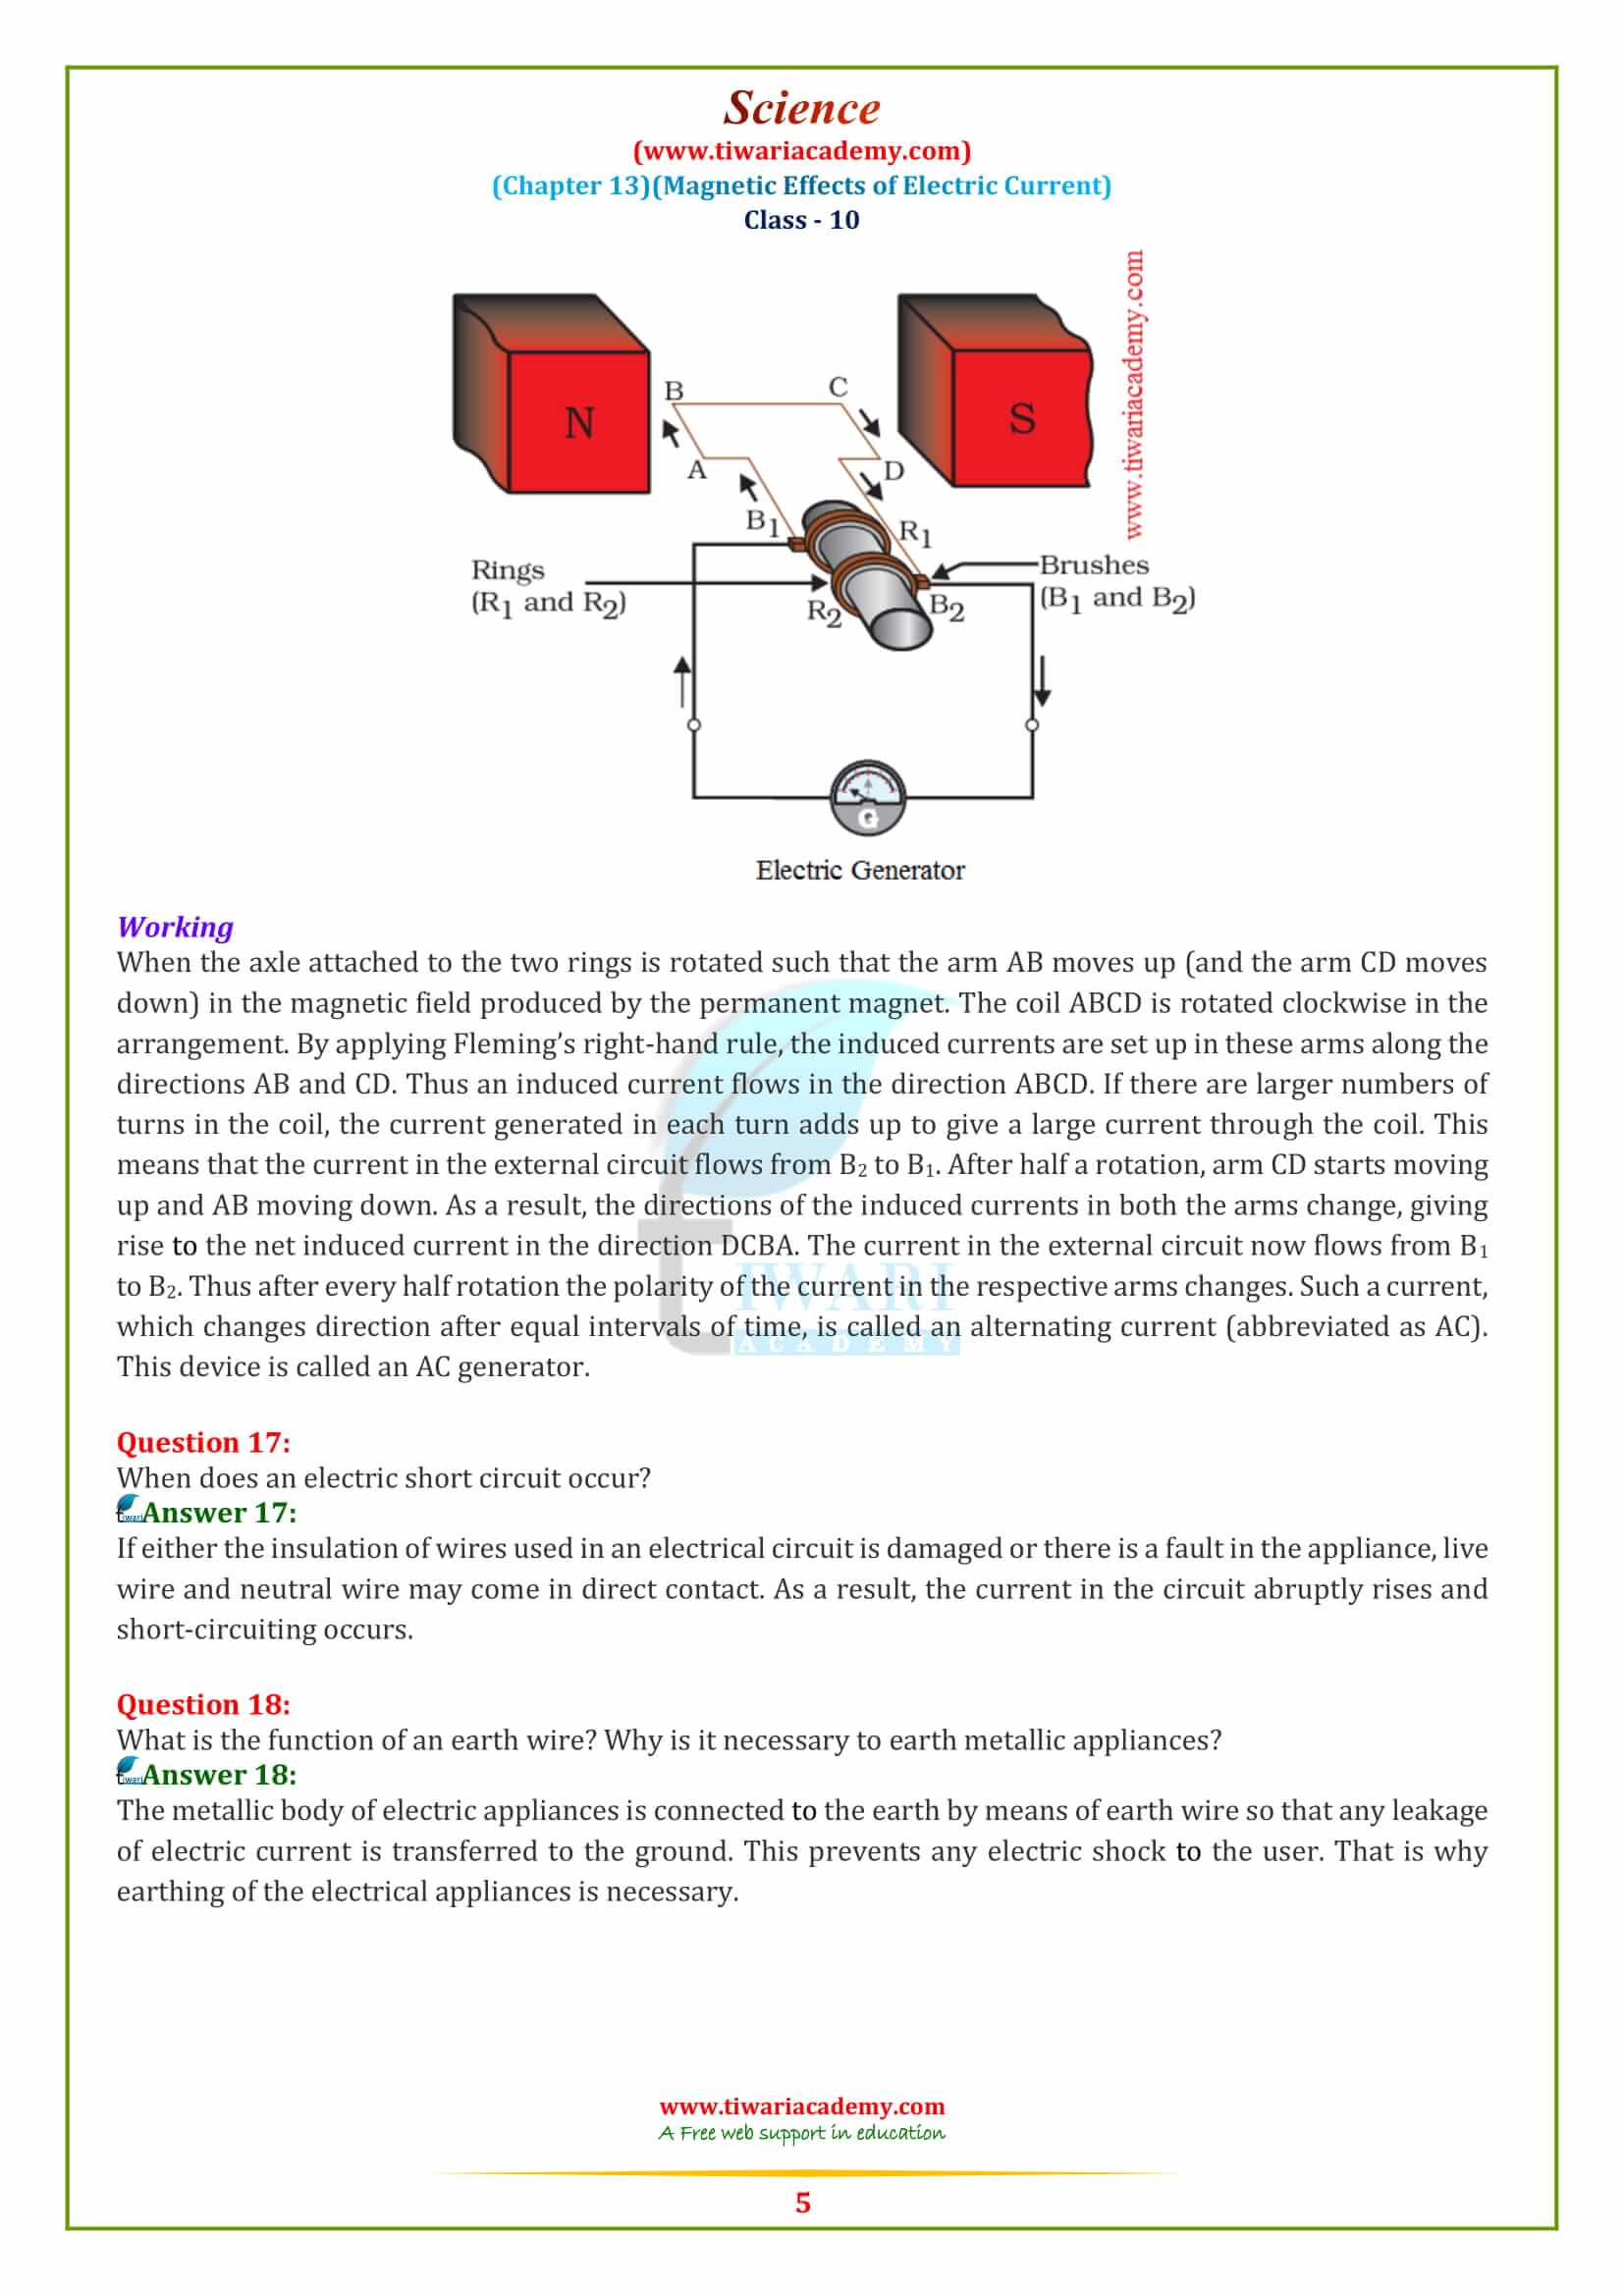 10 Science Chapter 13 Magnetic Effect of Electric Current Exercises solutions all question answers